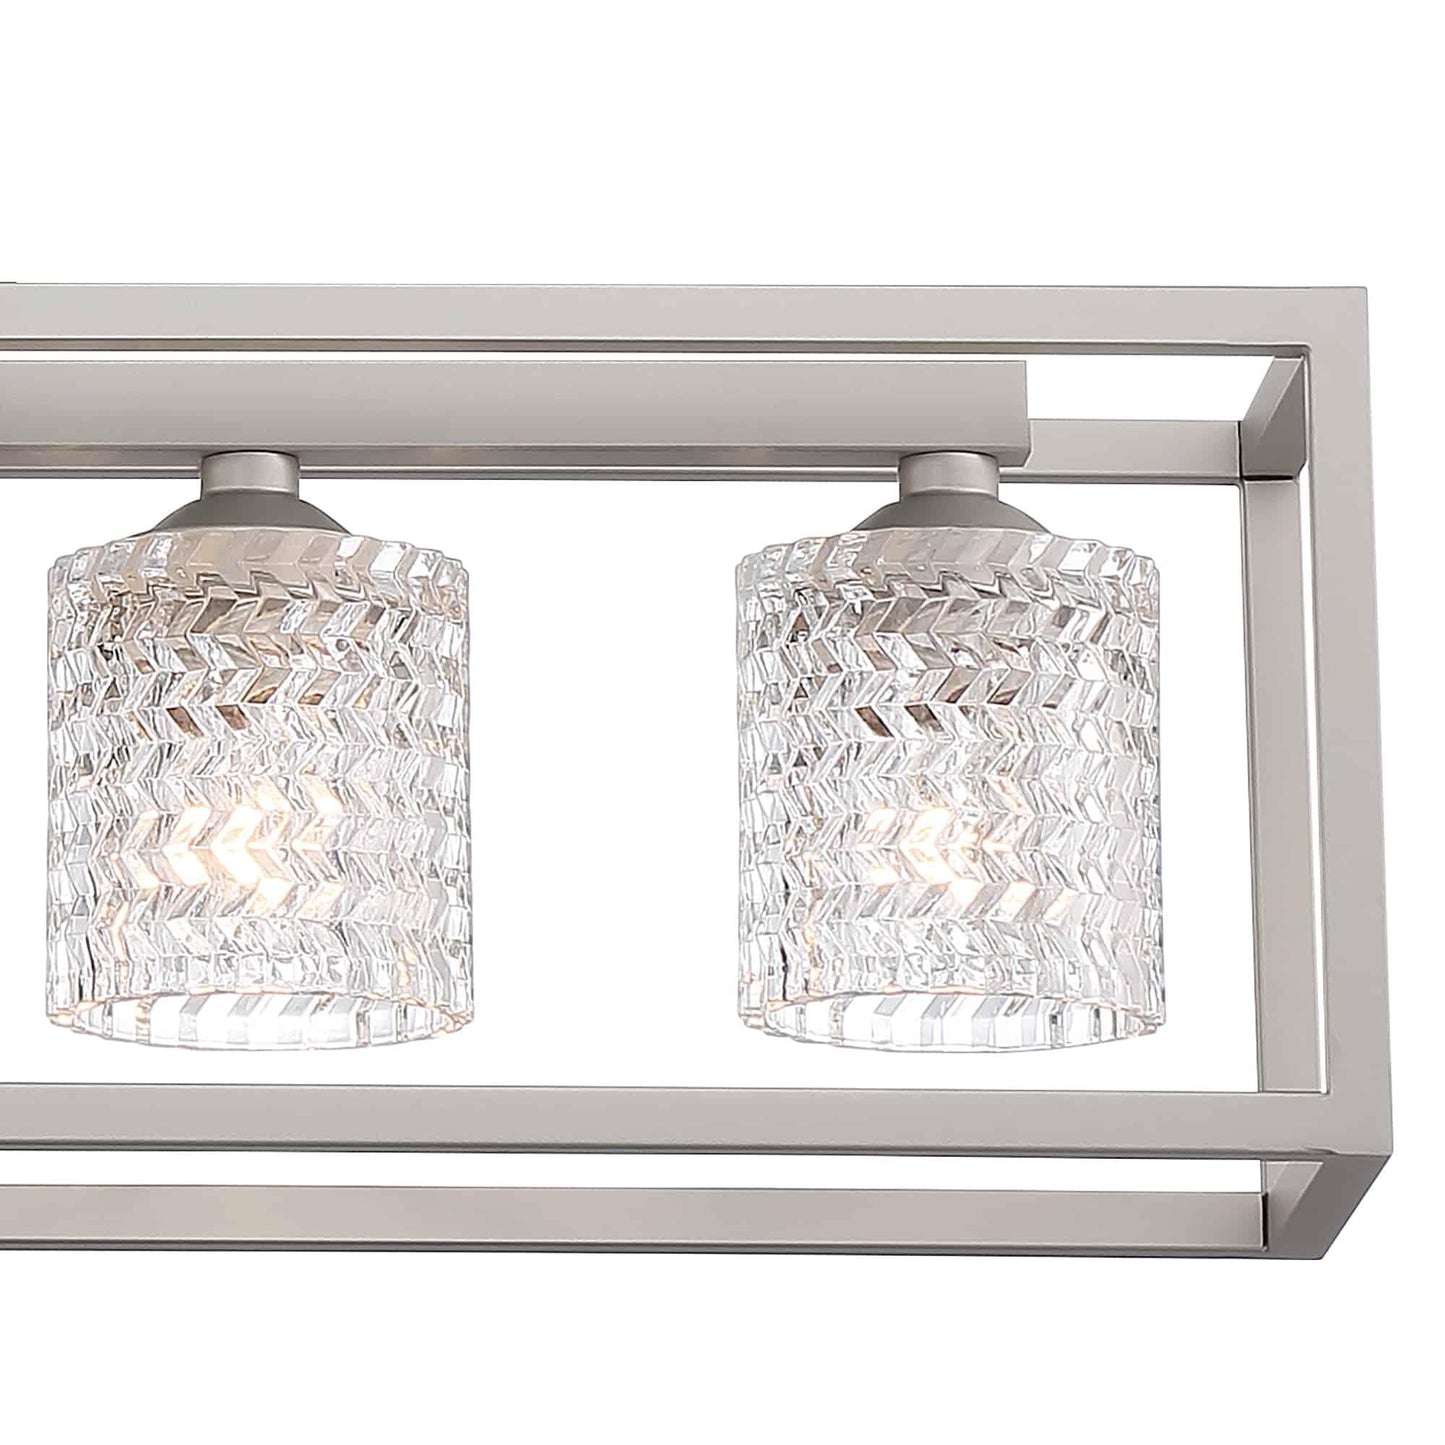 5 light lantern rectangle chandelier with accents (10) by ACROMA